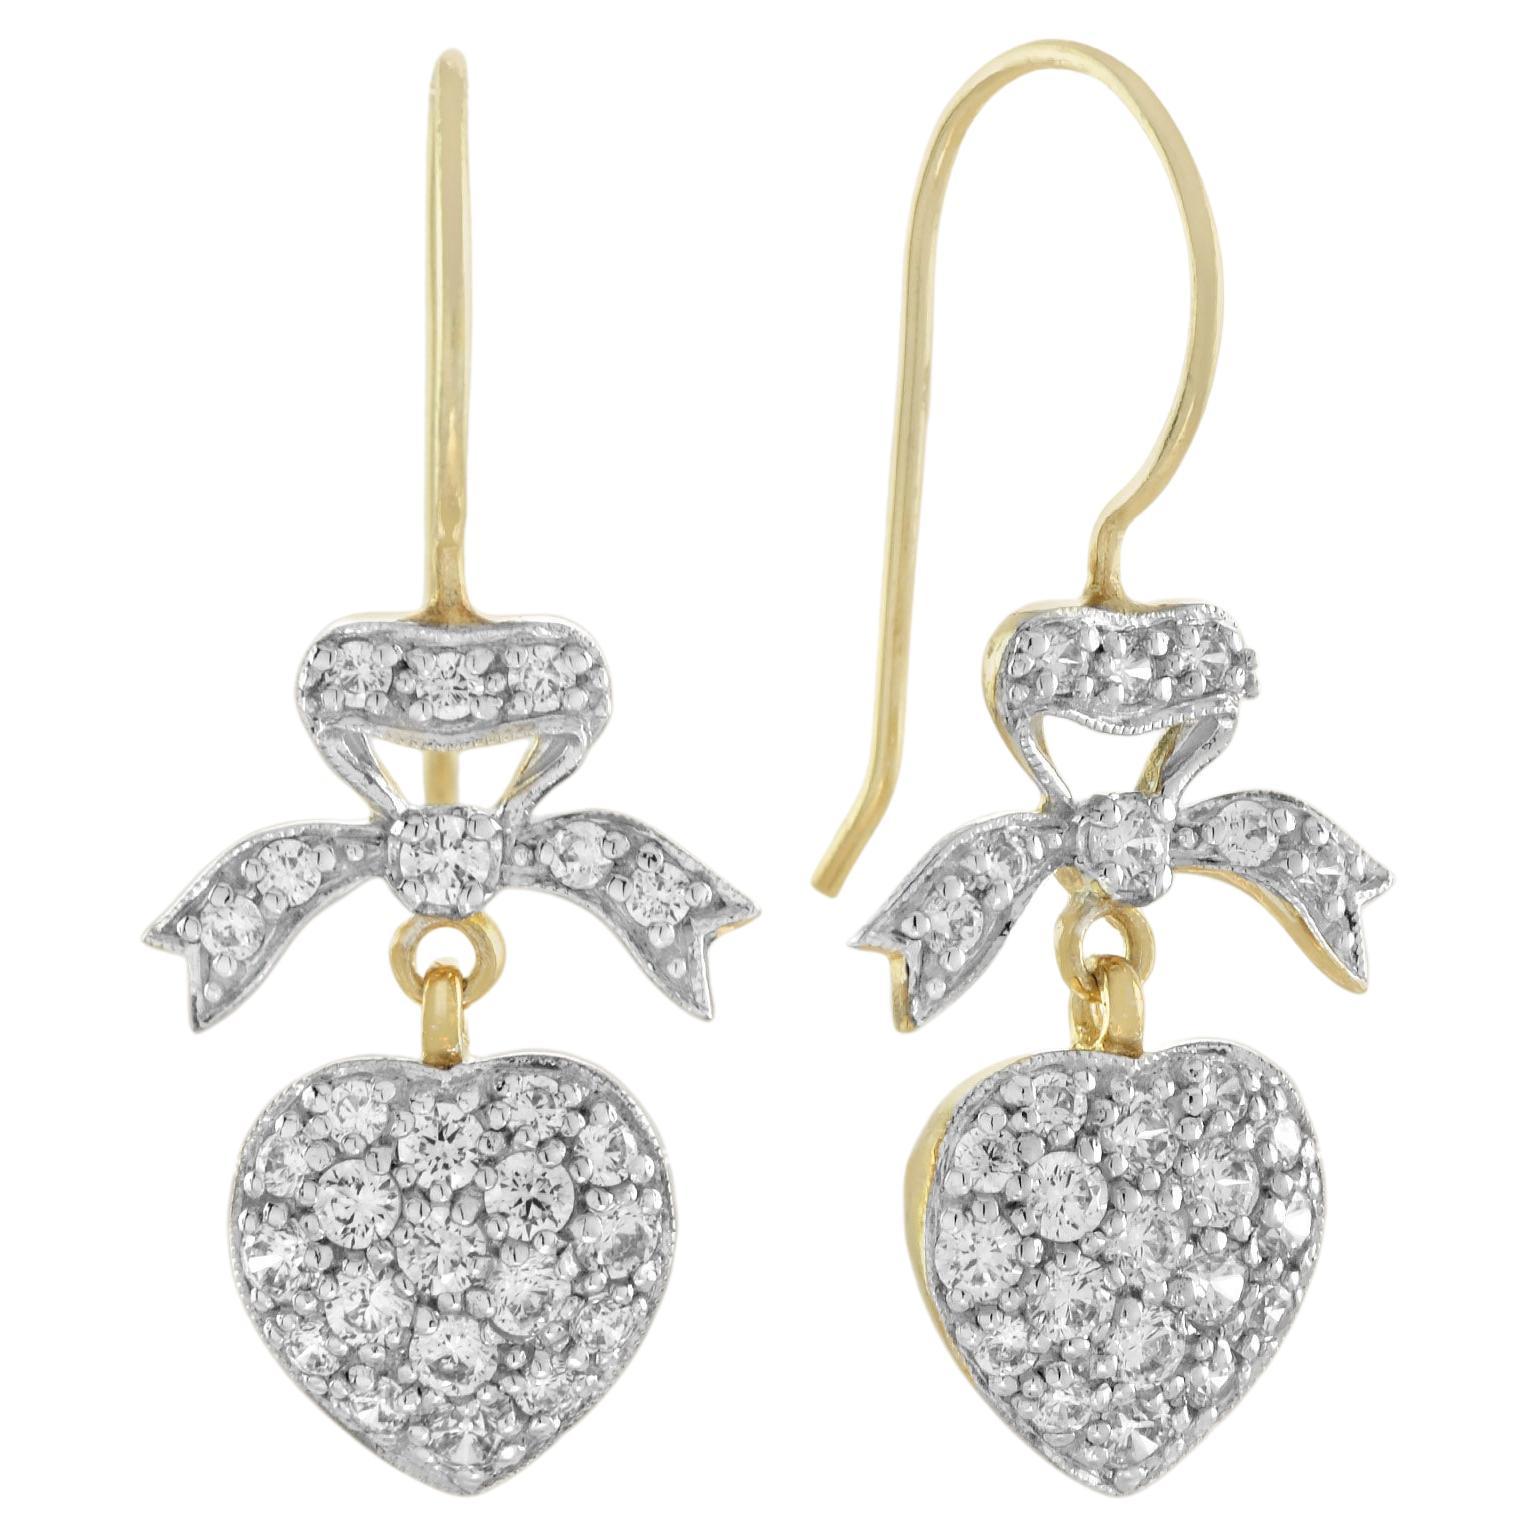 Diamond Heart and Bow Vintage Style Dangle Earrings in 14K Yellow Gold